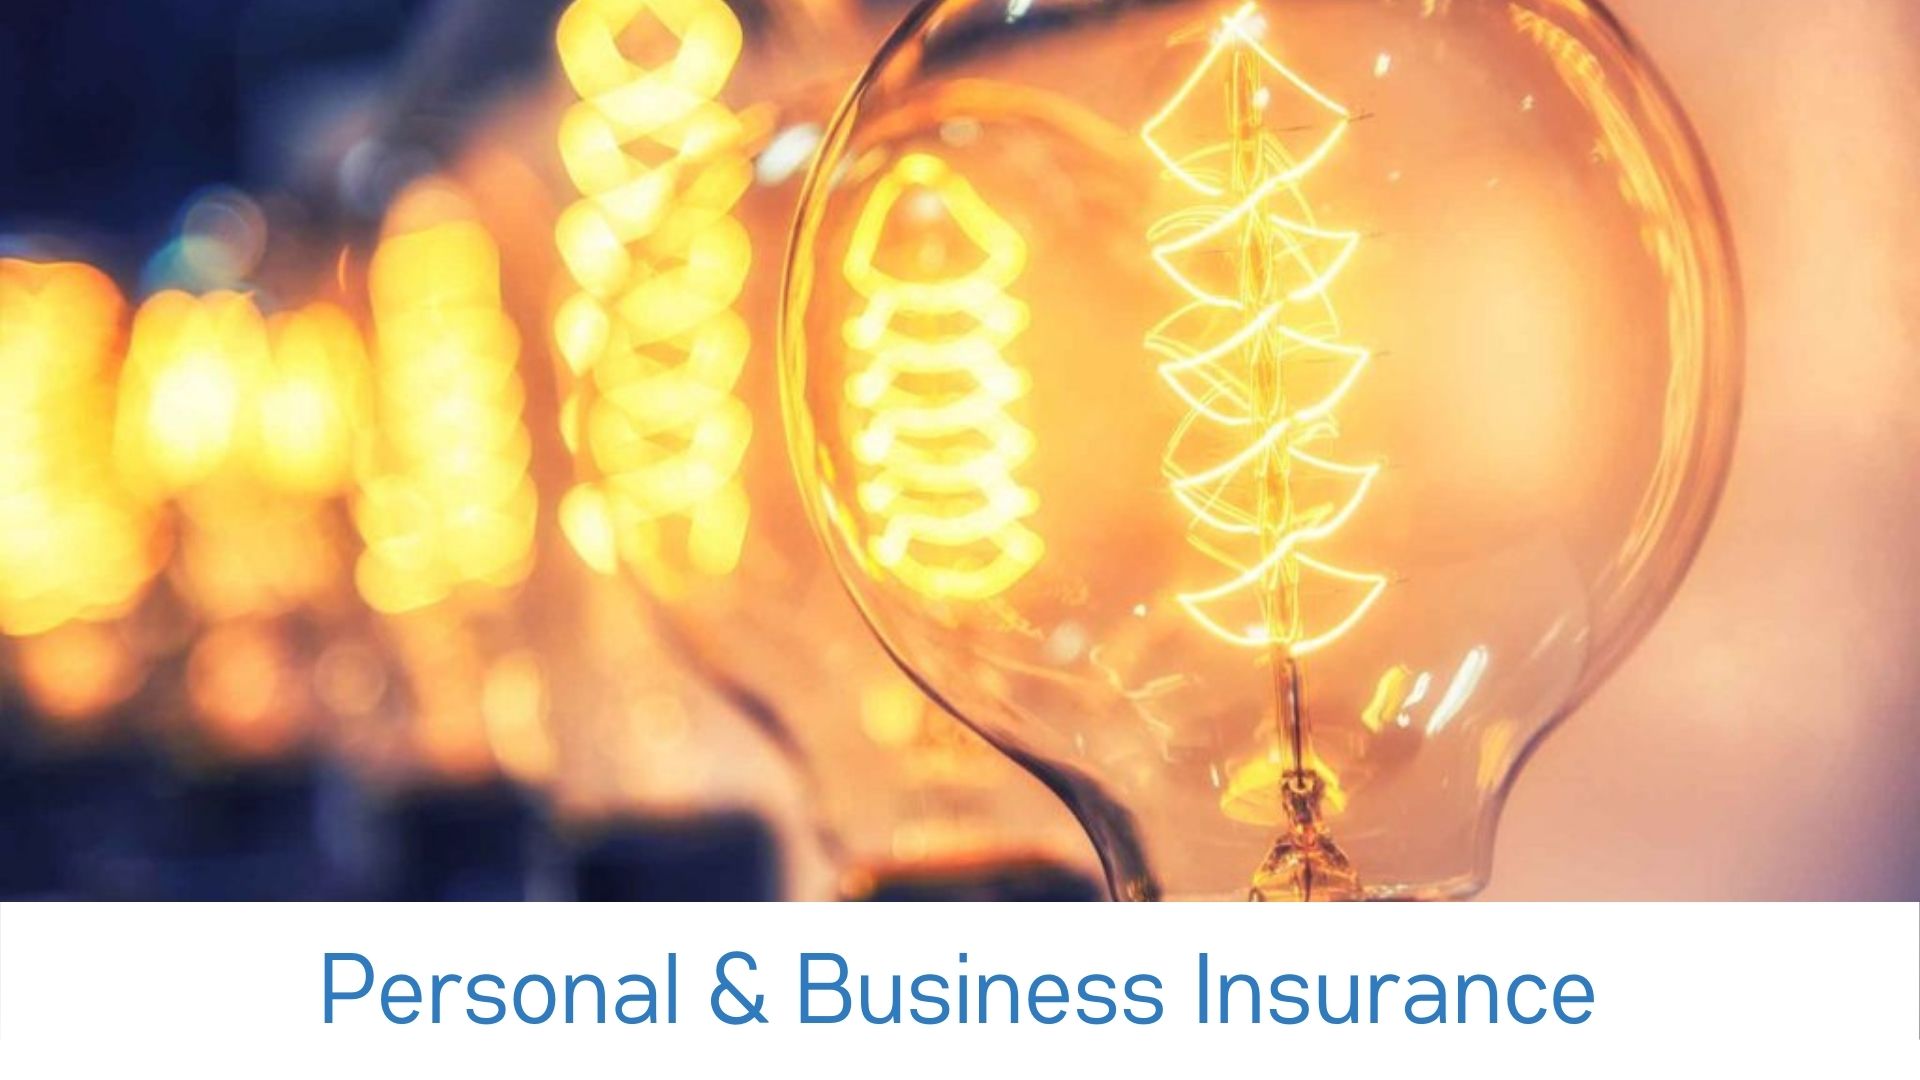 Personal & Business Insurance